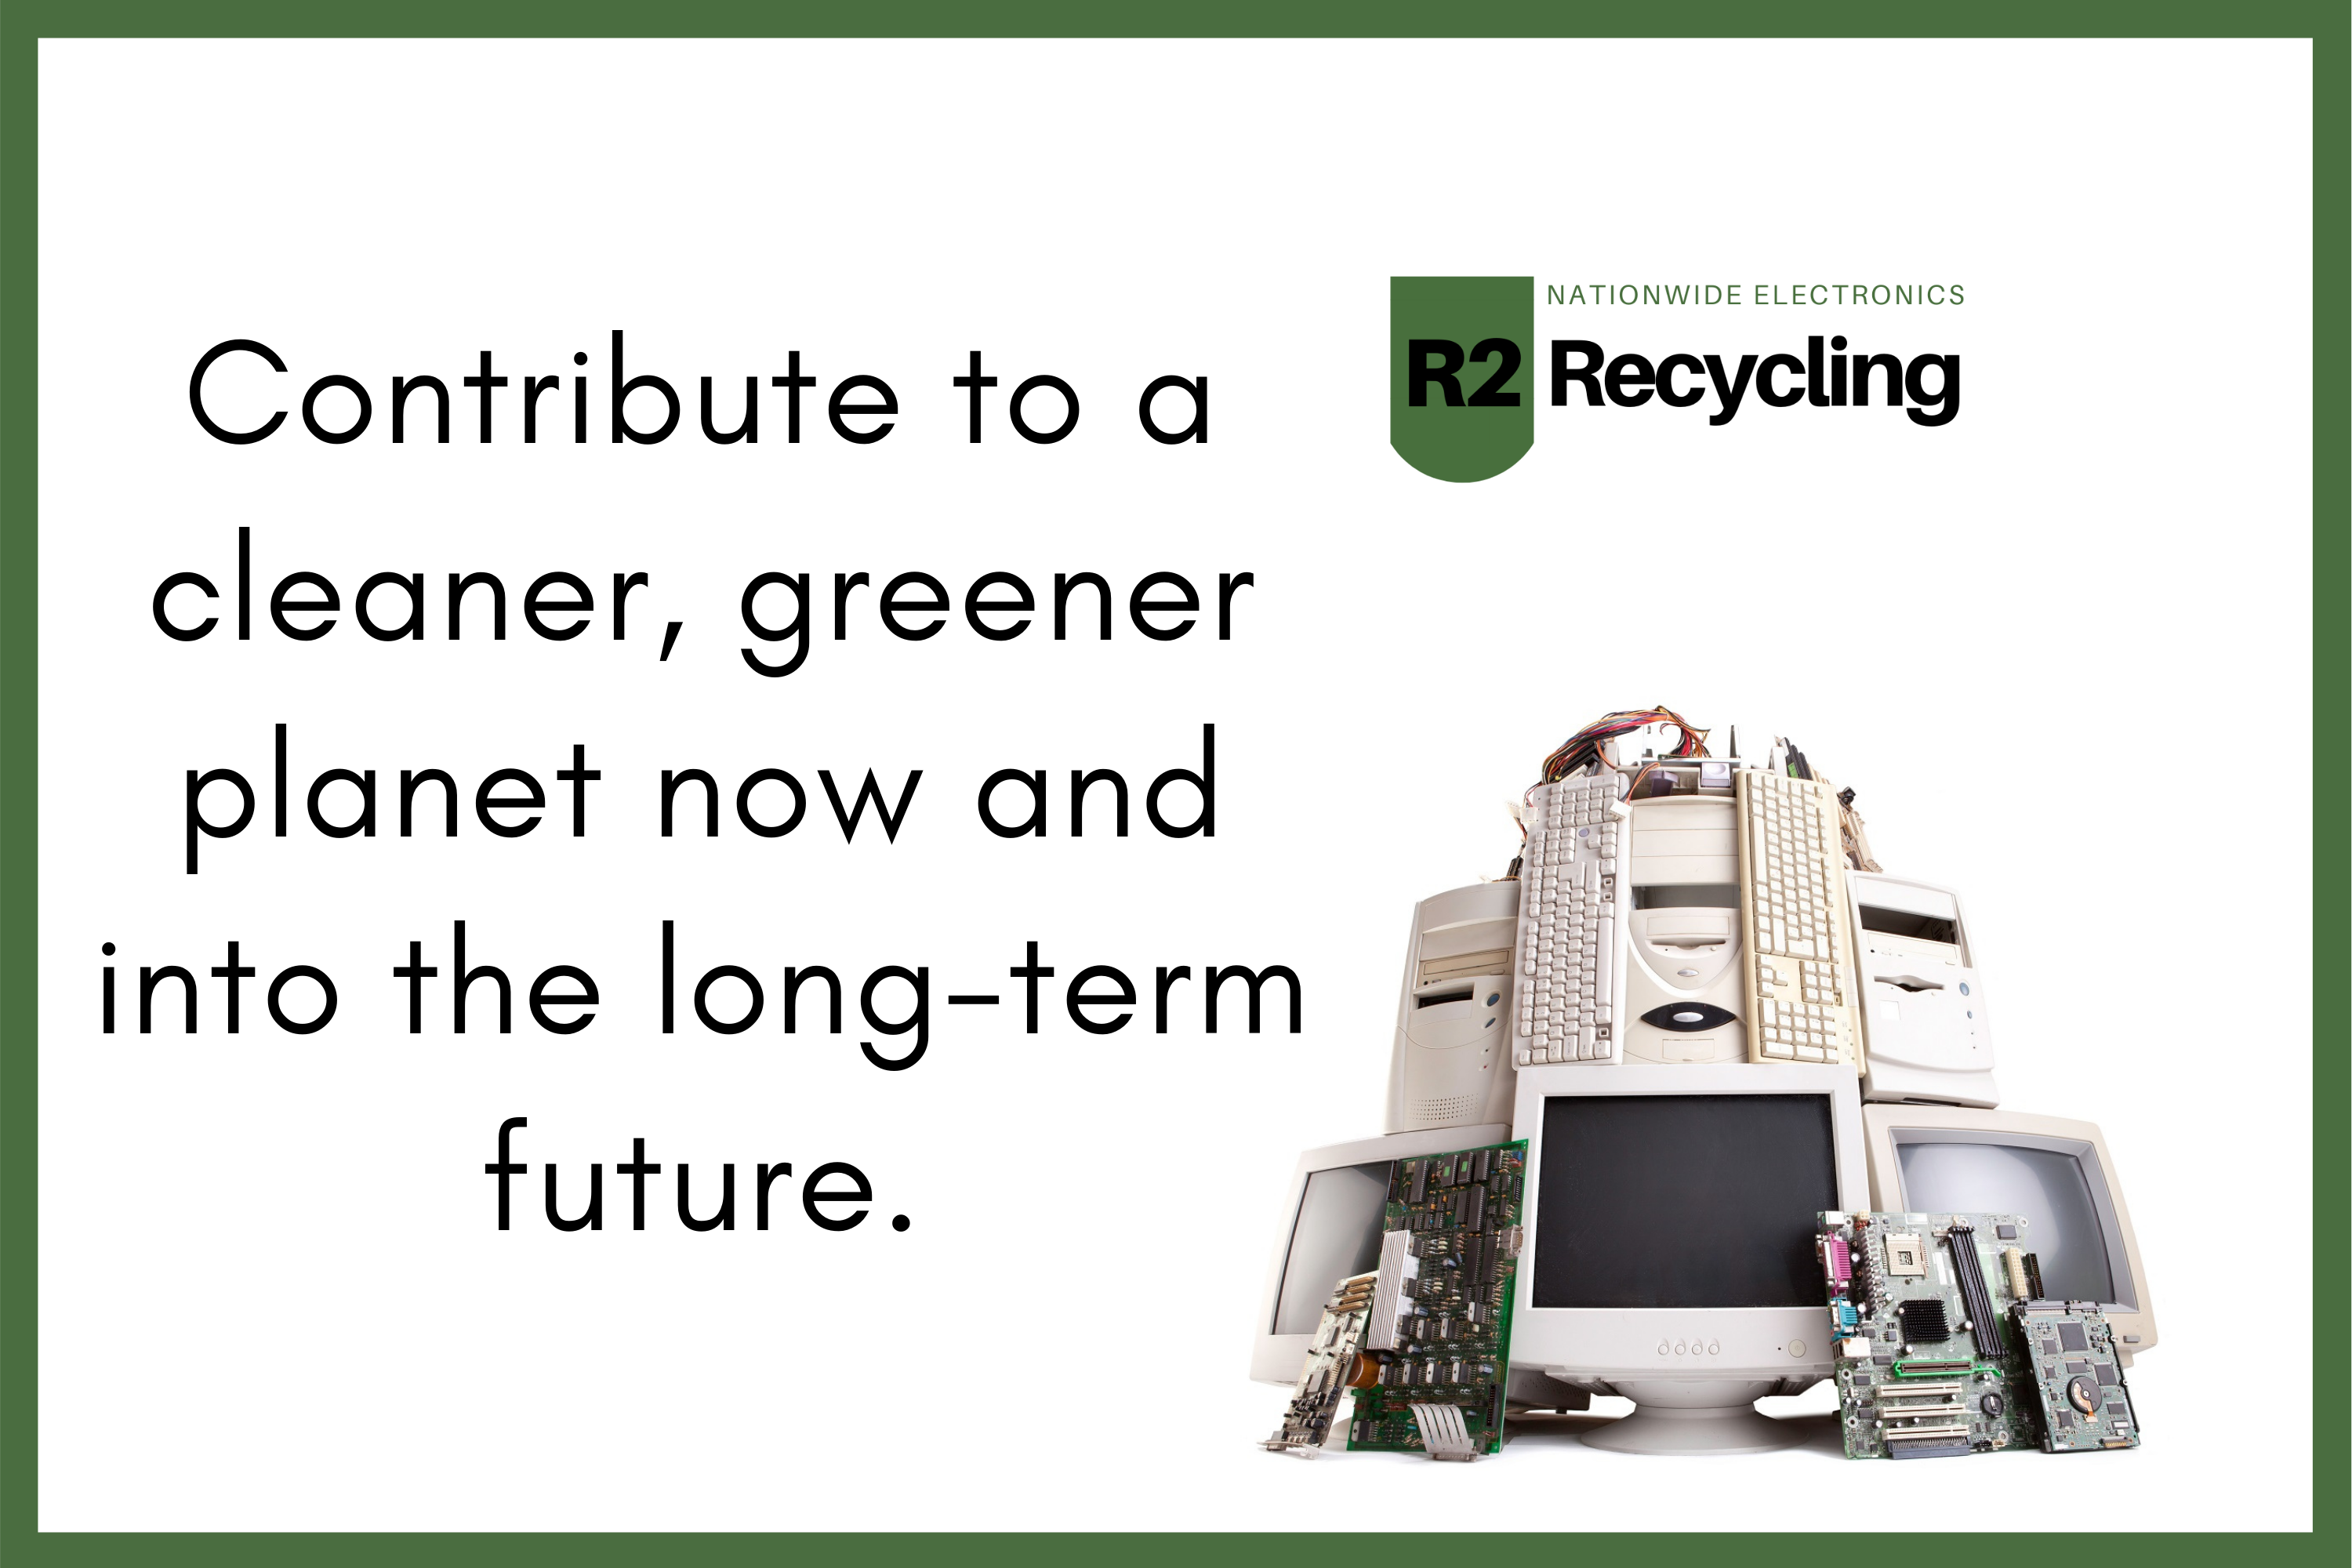 R2 Recycling, Thursday, December 3, 2020, Press release picture